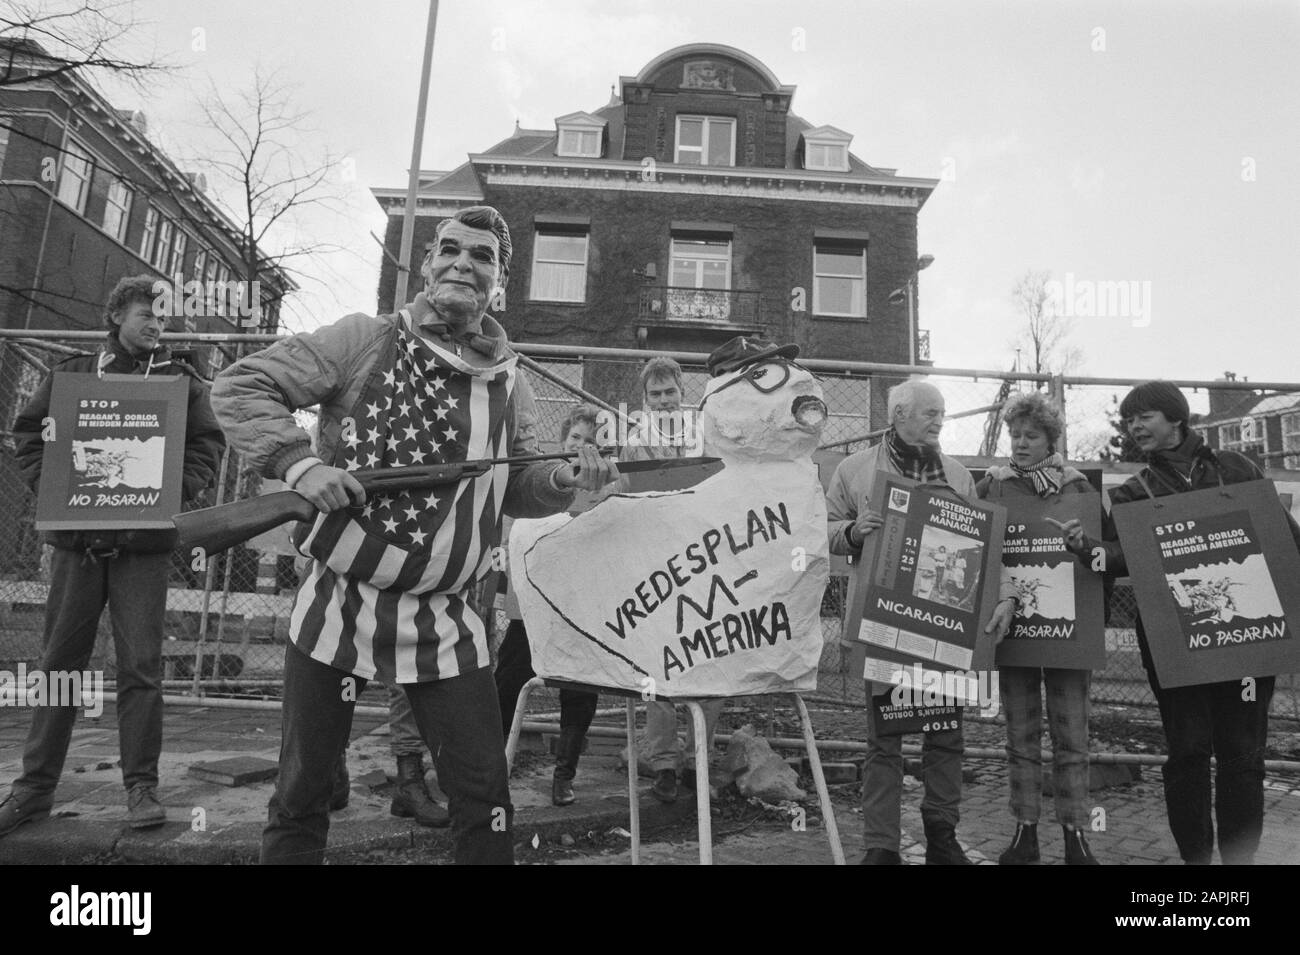 Demonstration for American consulate in Amsterdam against proposal Reagan for assistance to contras in Nicaragua Date: February 3, 1988 Location: Amsterdam, Noord-Holland Keywords: CONSULATES, demonstrations Personal name: President Reagan Stock Photo